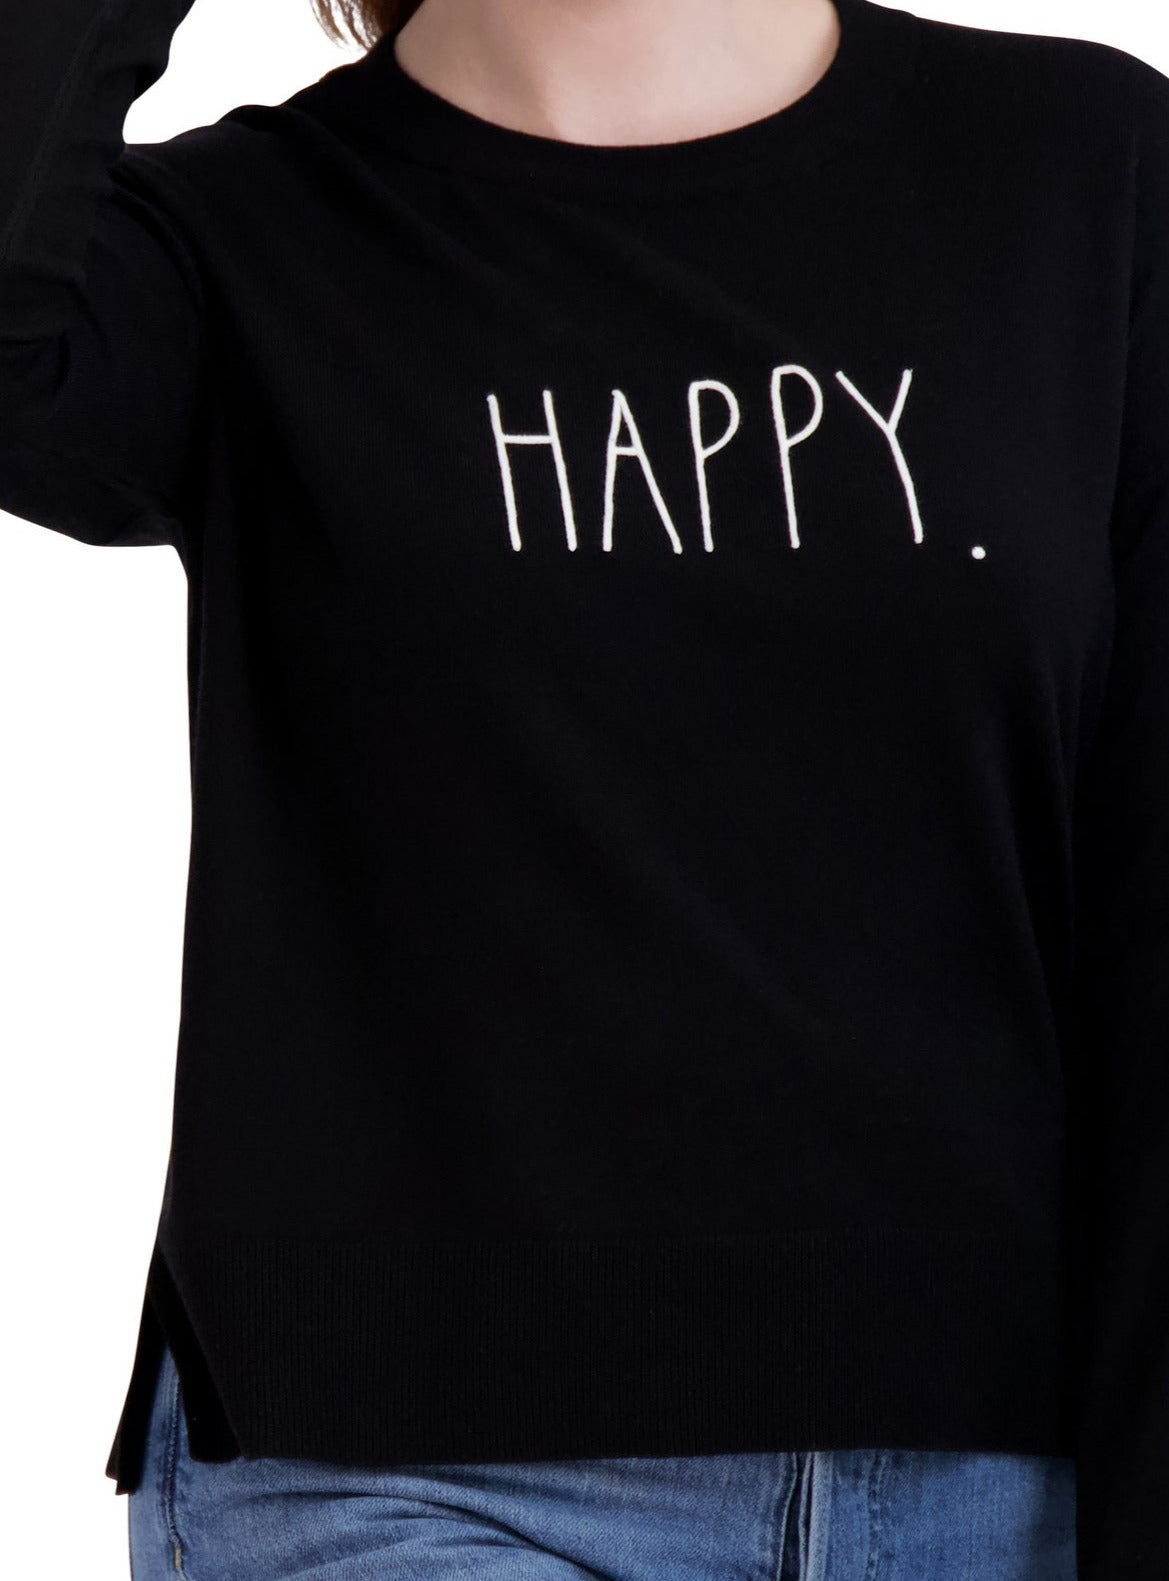 Women's Embroidered "HAPPY" Knit Black Sweater - Rae Dunn Wear - W Sweater